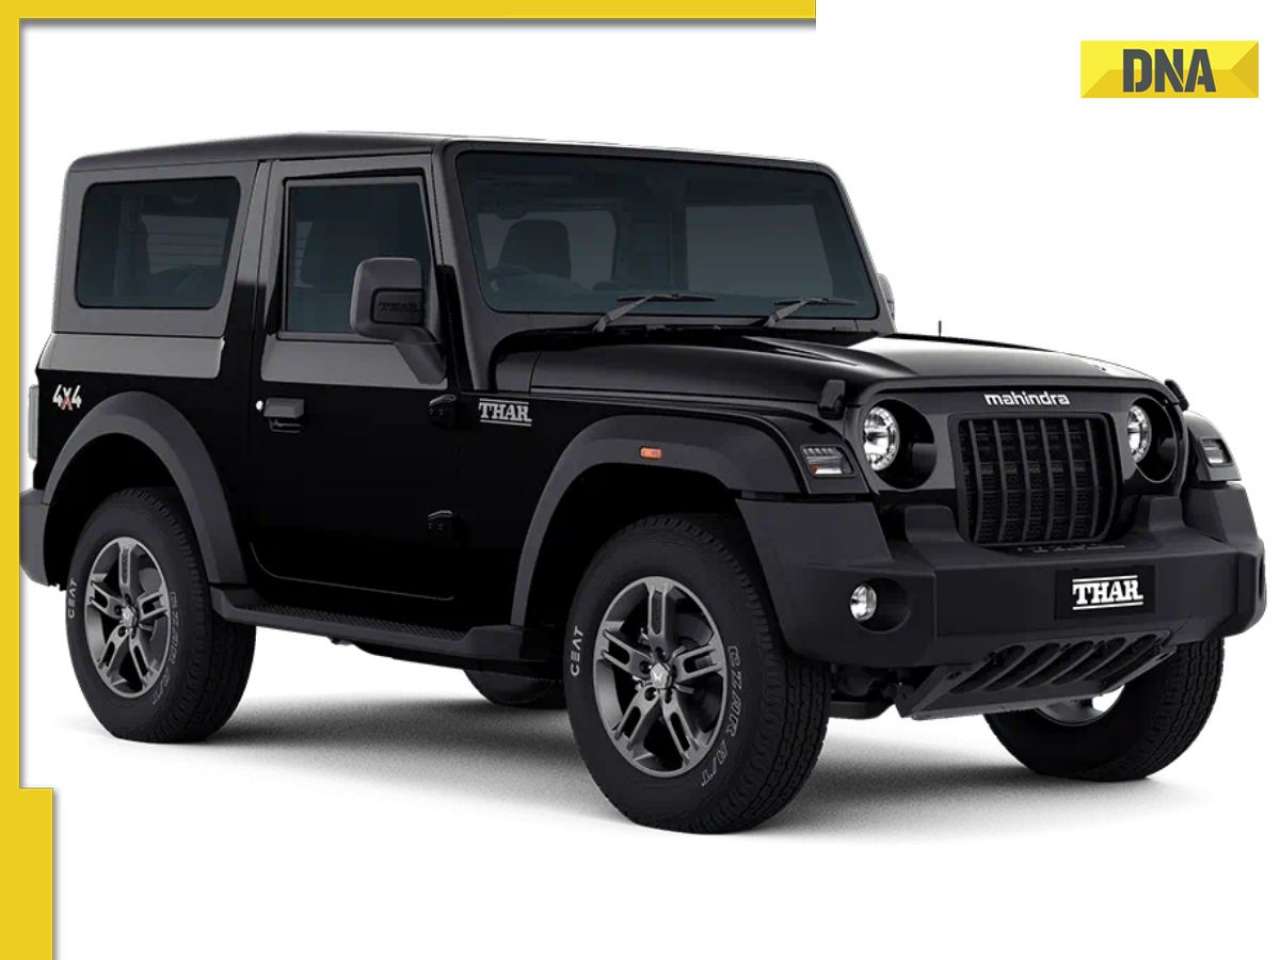 Mahindra Thar’s popular Napoli Black colour option discontinued, to offer SUV in a new dark colour called…